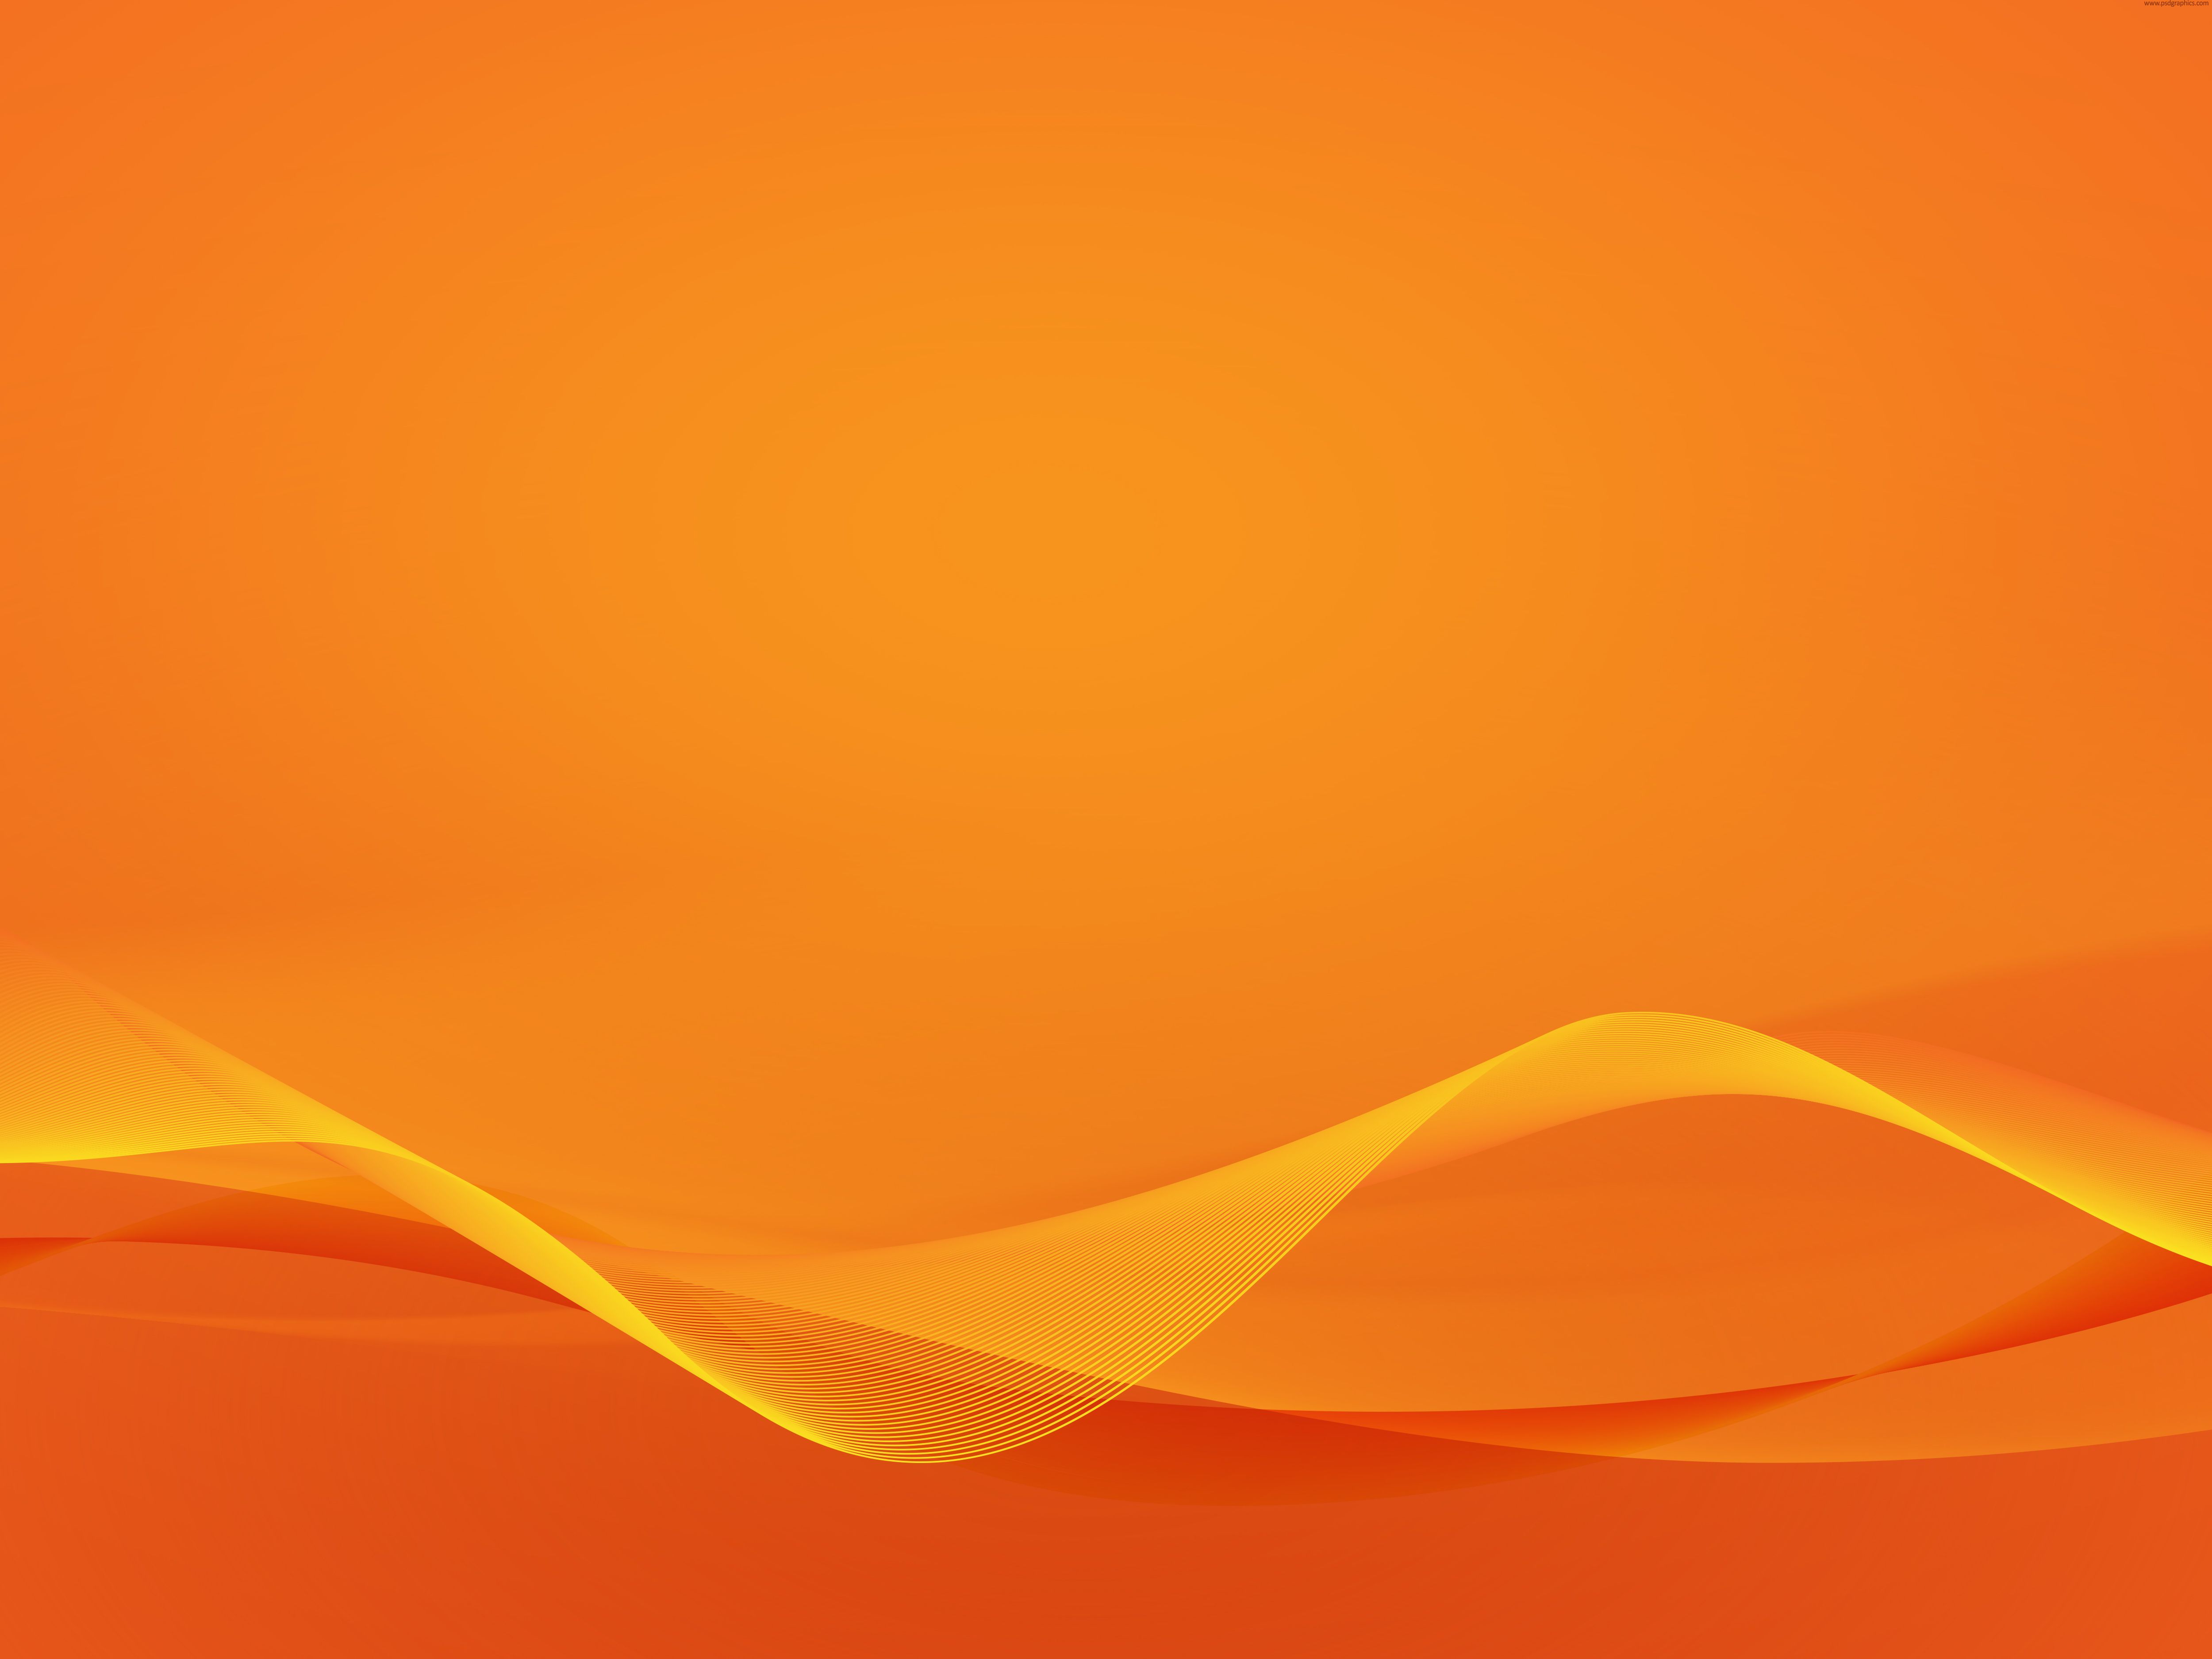 Orange And Blue Design Wallpapers